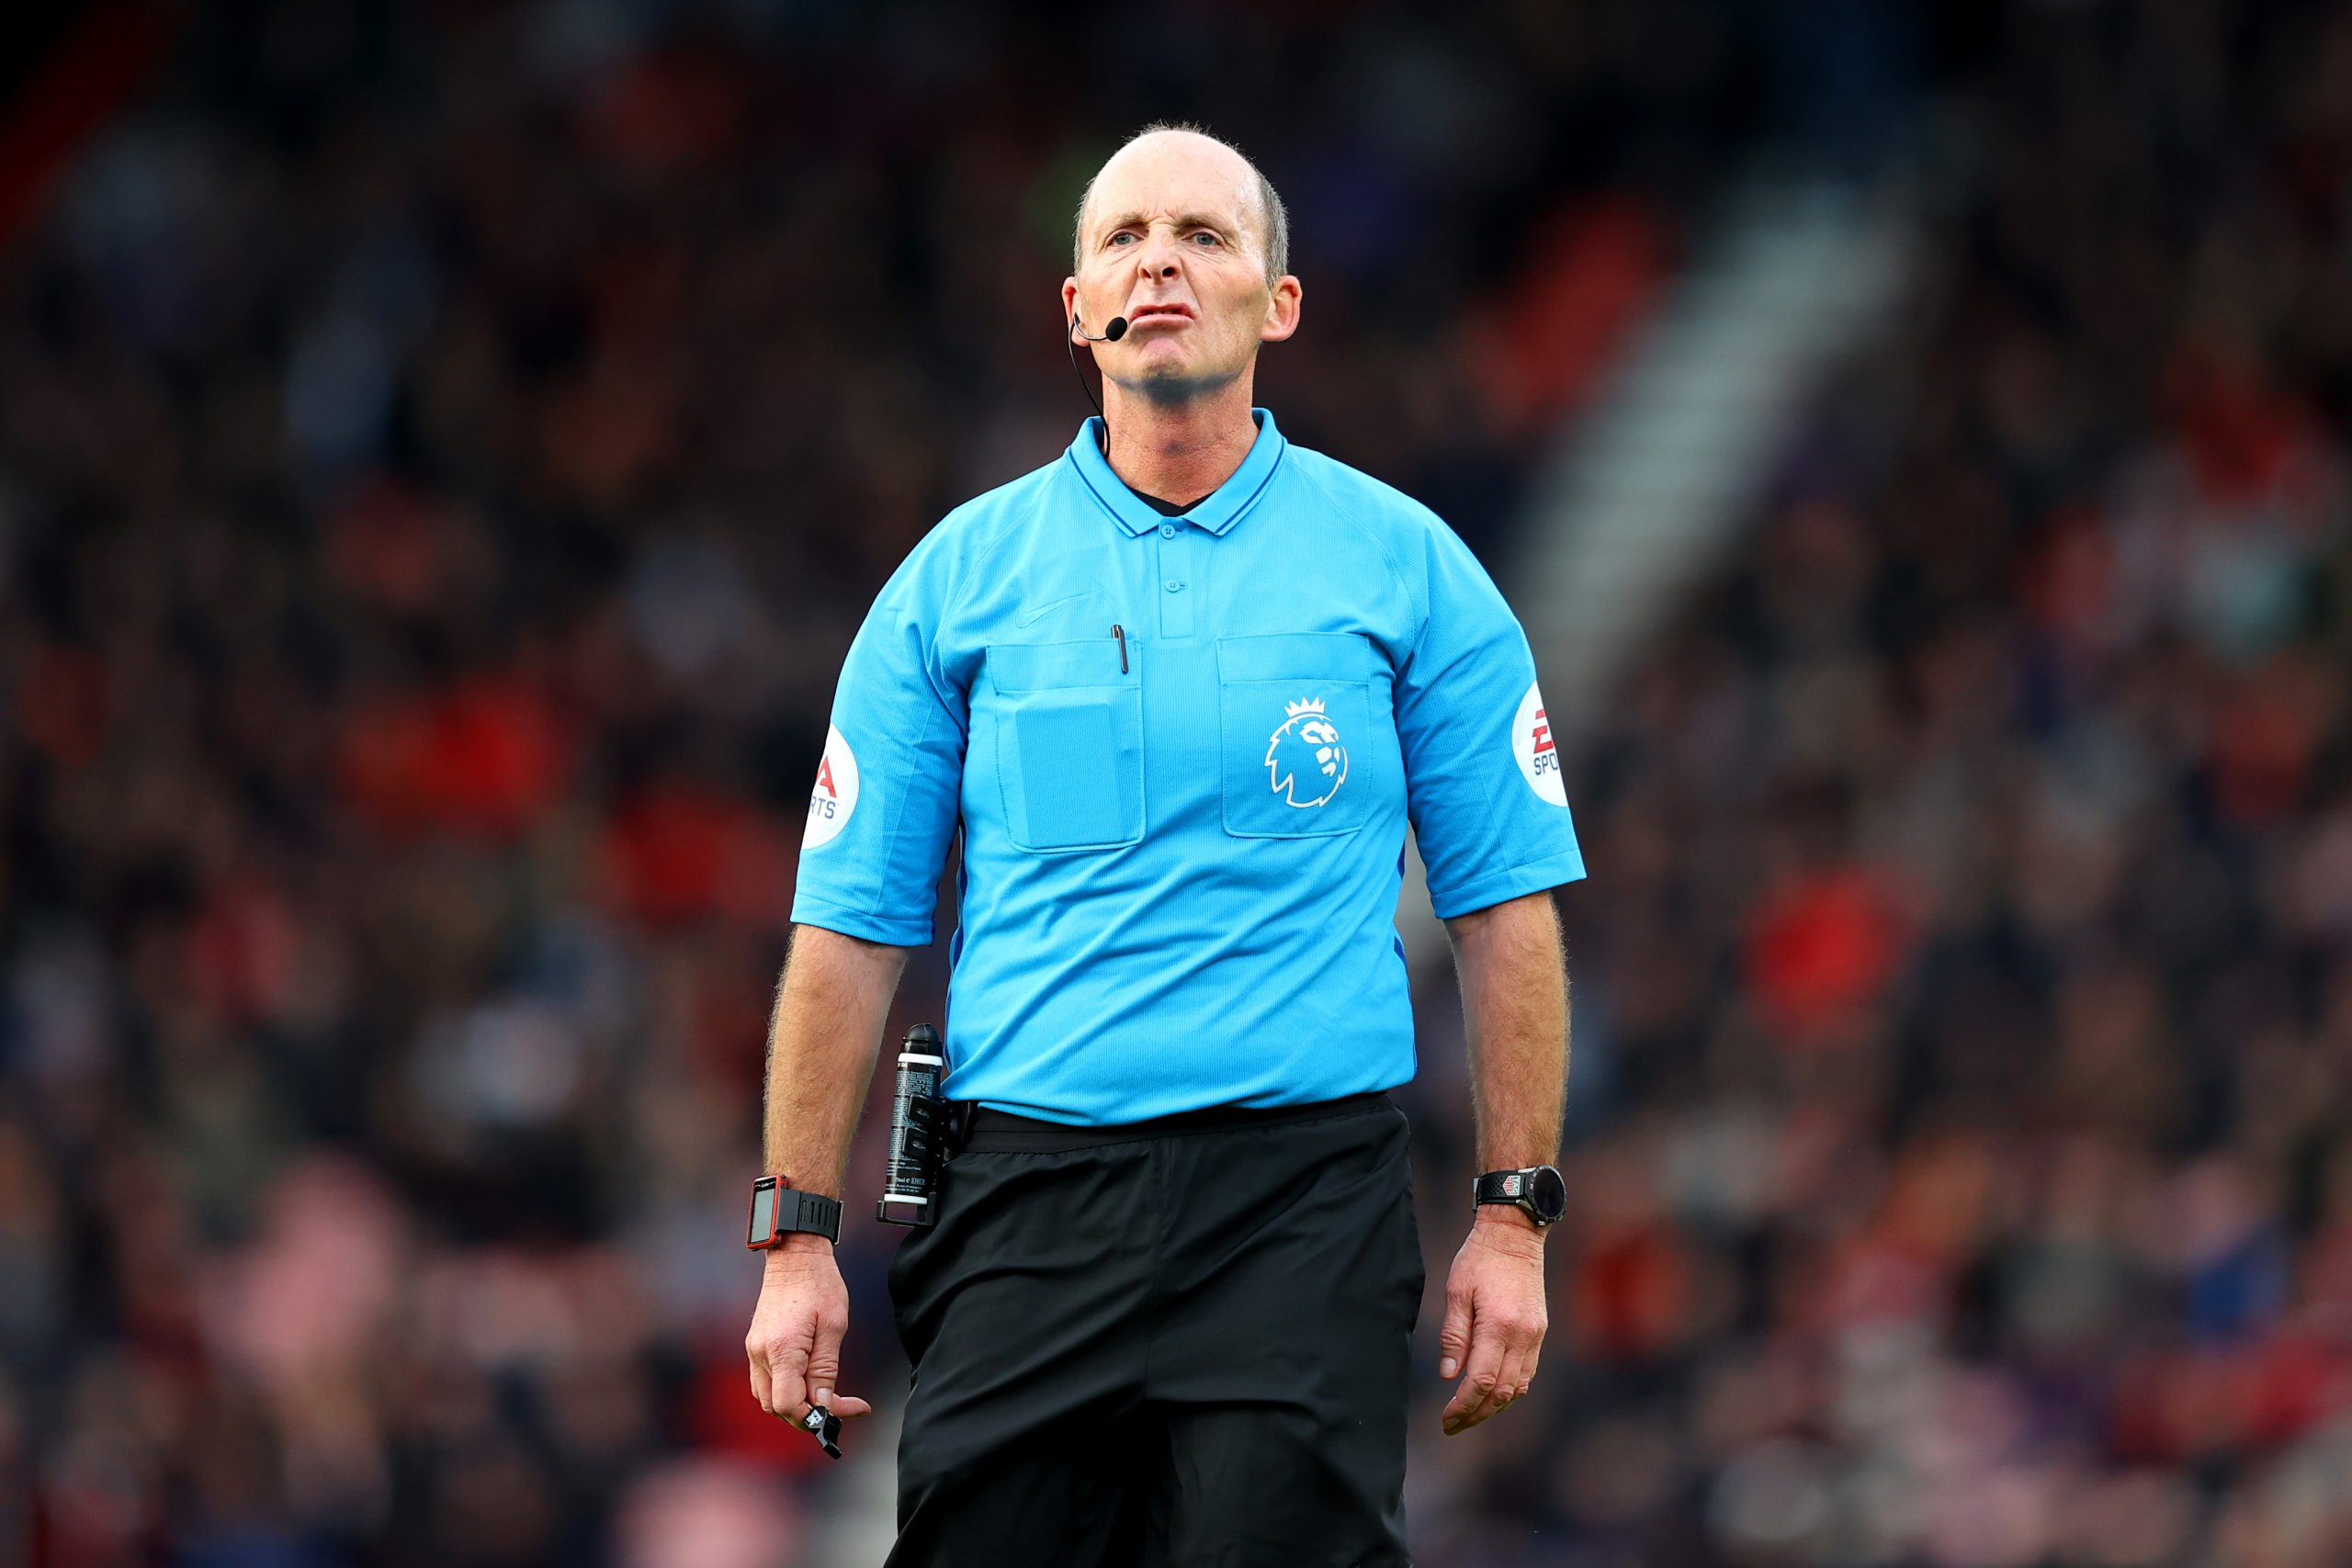 BOURNEMOUTH, ENGLAND - JANUARY 12: Referee Mike Dean reacts during the Premier League match between AFC Bournemouth and Watford FC at Vitality Stadium on January 12, 2020 in Bournemouth, United Kingdom. (Photo by Richard Heathcote/Getty Images)